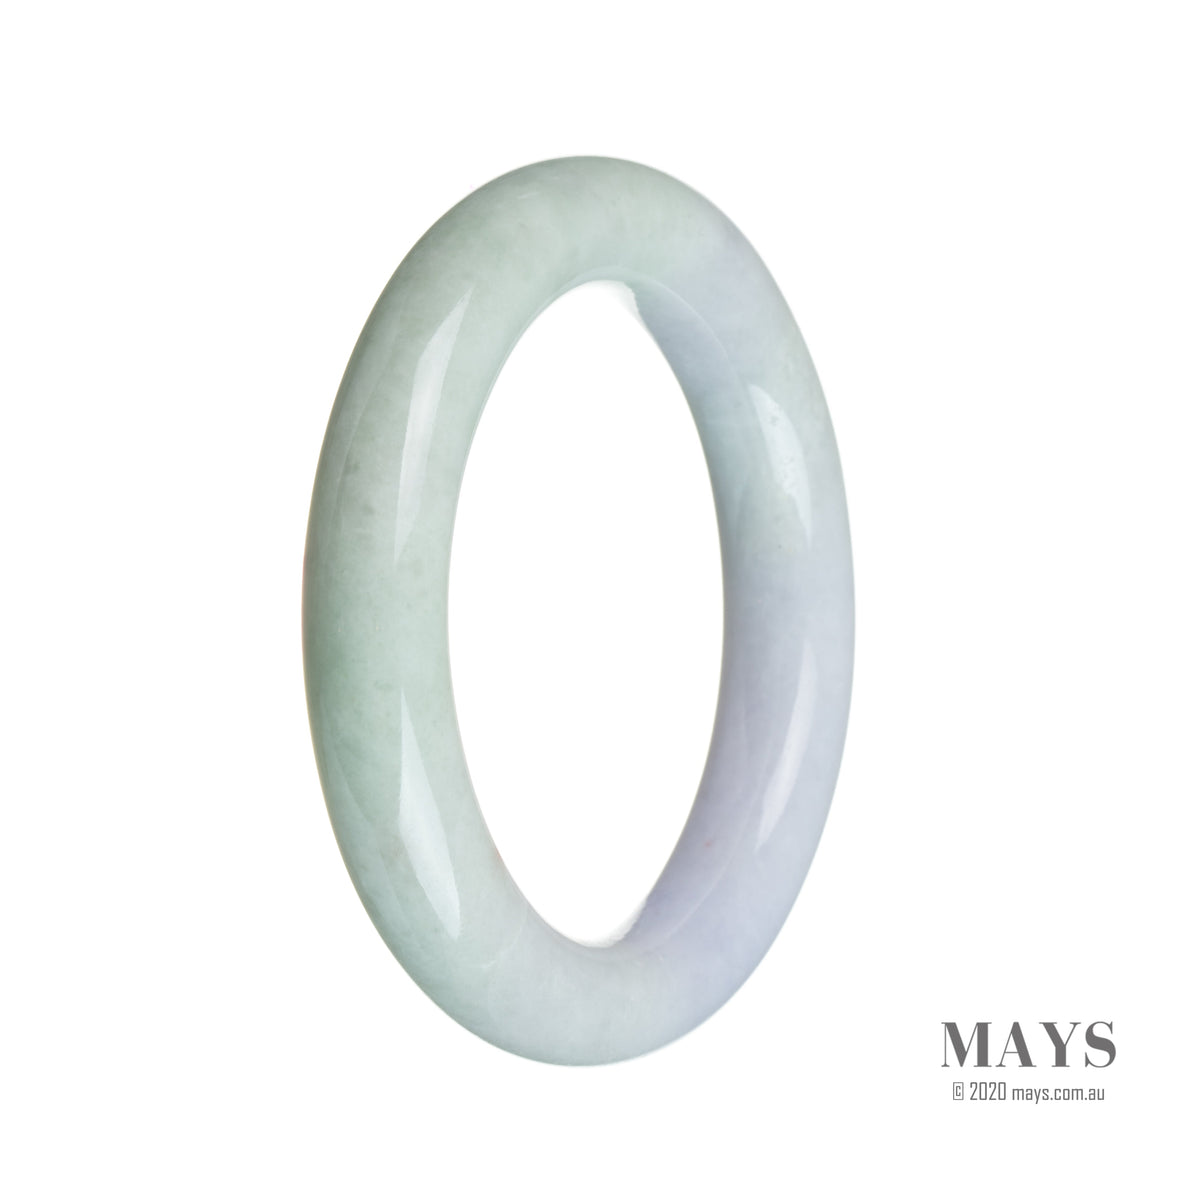 A close-up image of a round bangle bracelet made from green Jadeite Jade, adorned with genuine natural lavender flowers. The bracelet has a diameter of 54mm.